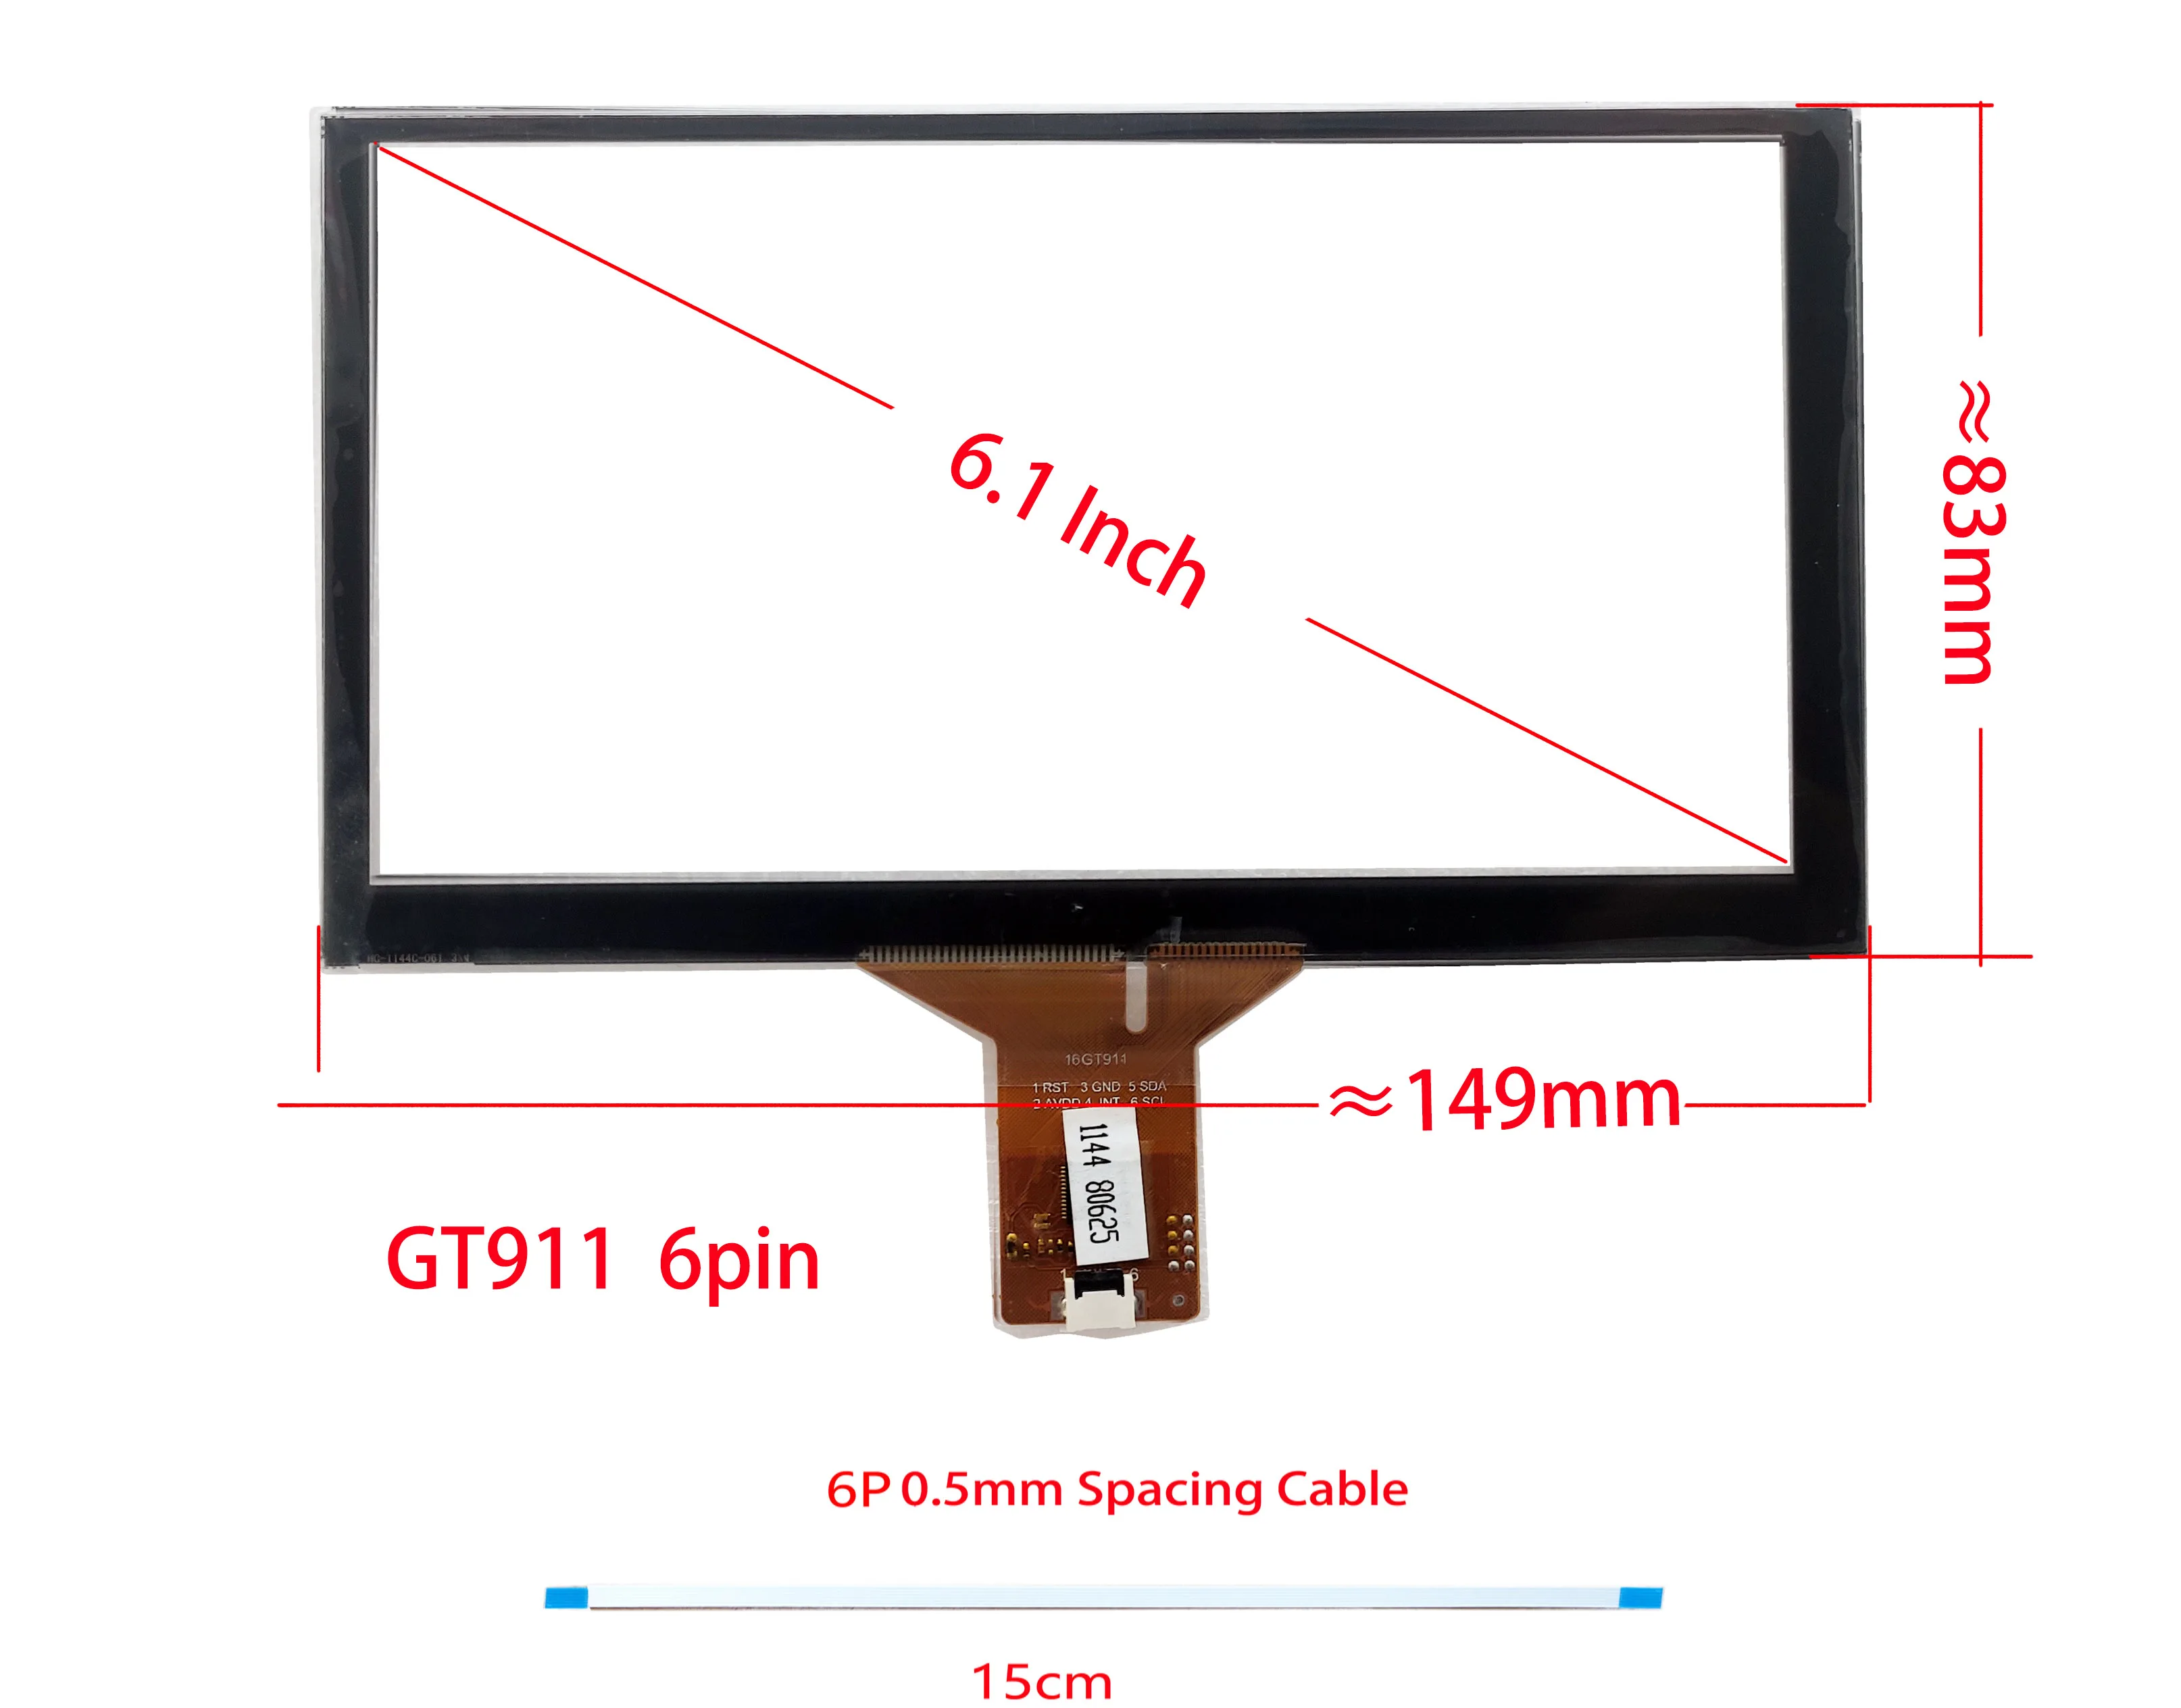 

6.1 inch Capacitive Touch Screen Sensor Digitizer Glass Paenl Hand Writer For Car Radio Carpc GT911 6pin 149mm*83mm 1144 80625